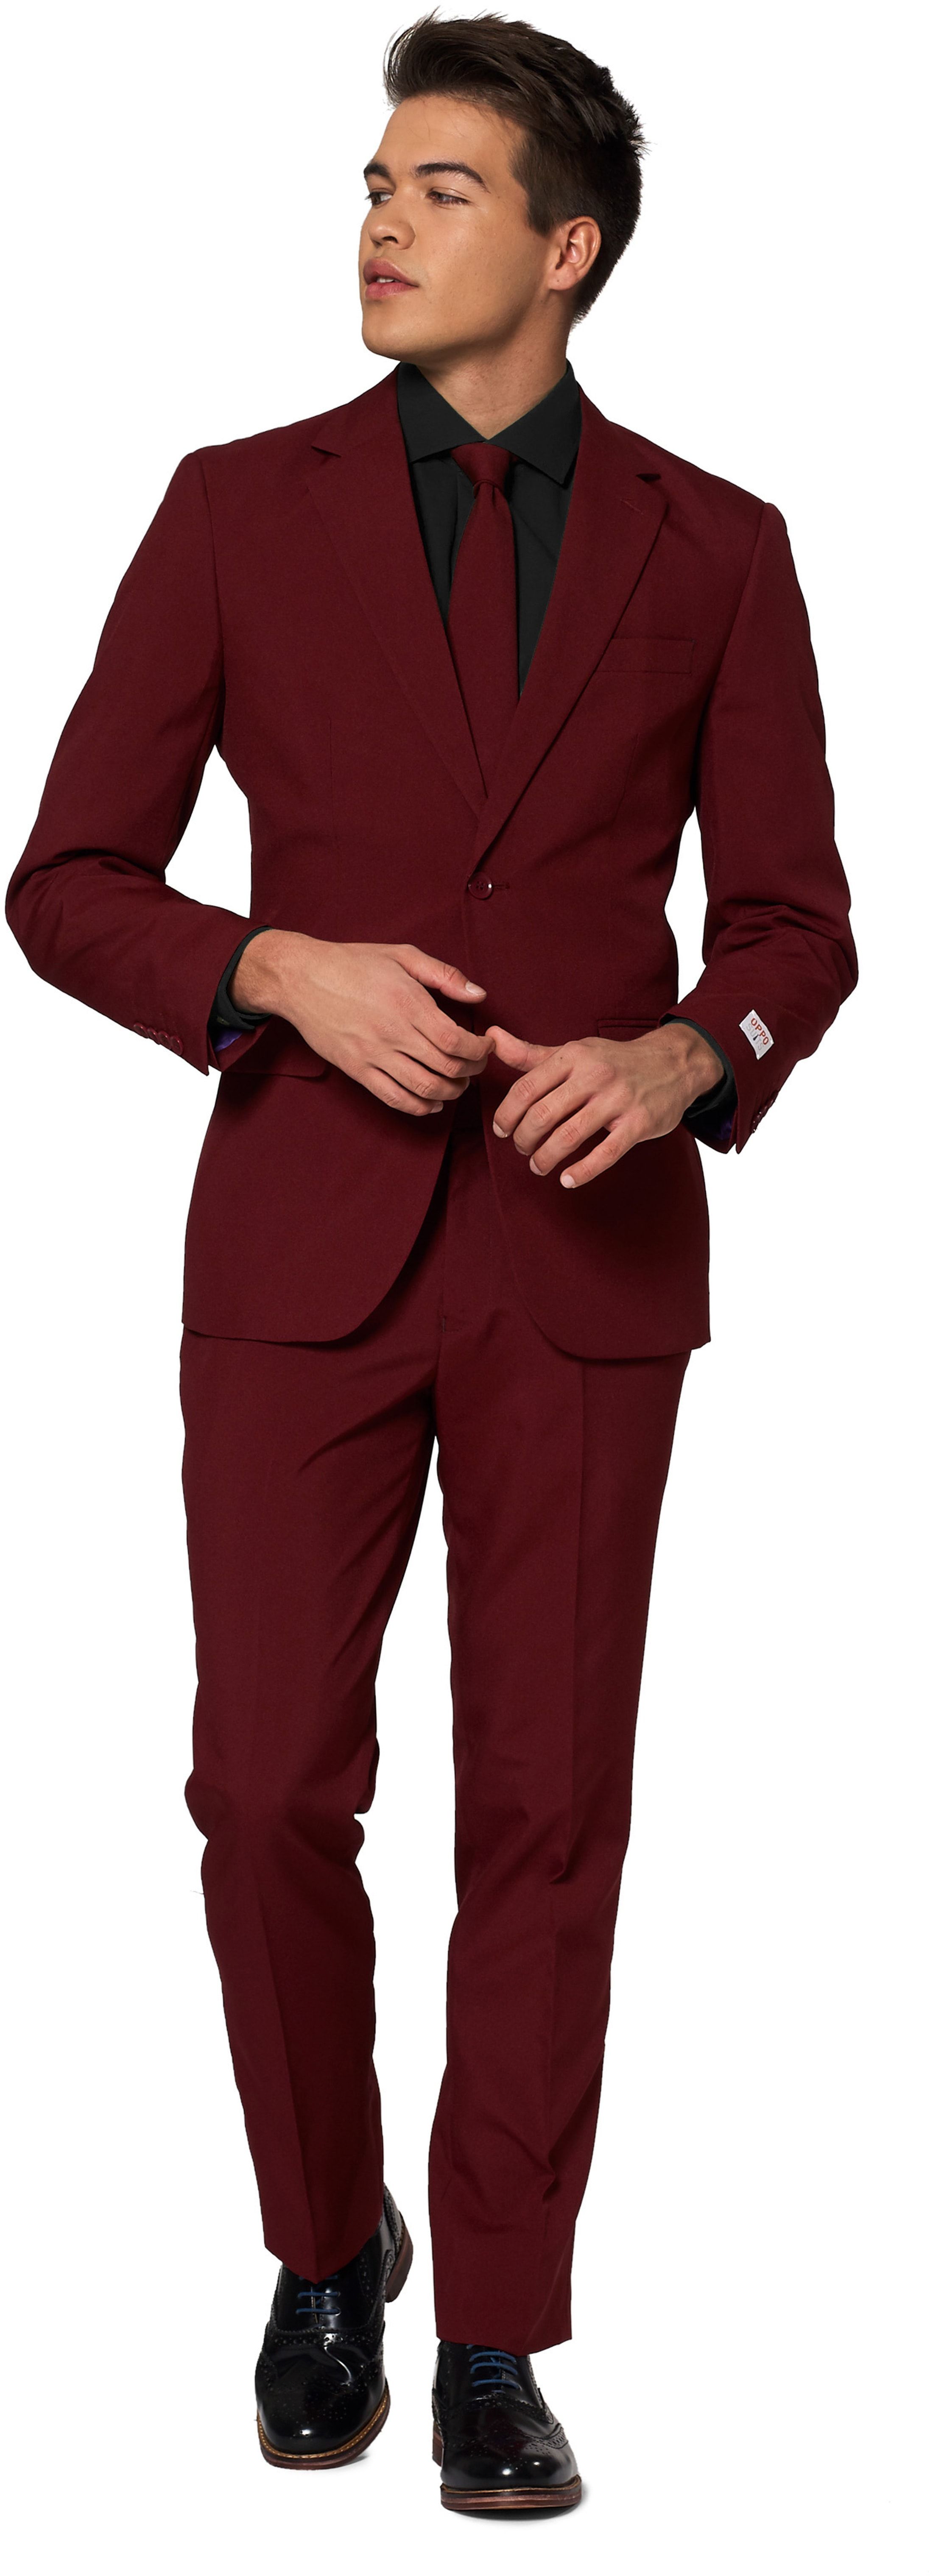 OppoSuits Costume Blazing Rouge Bordeaux taille 46